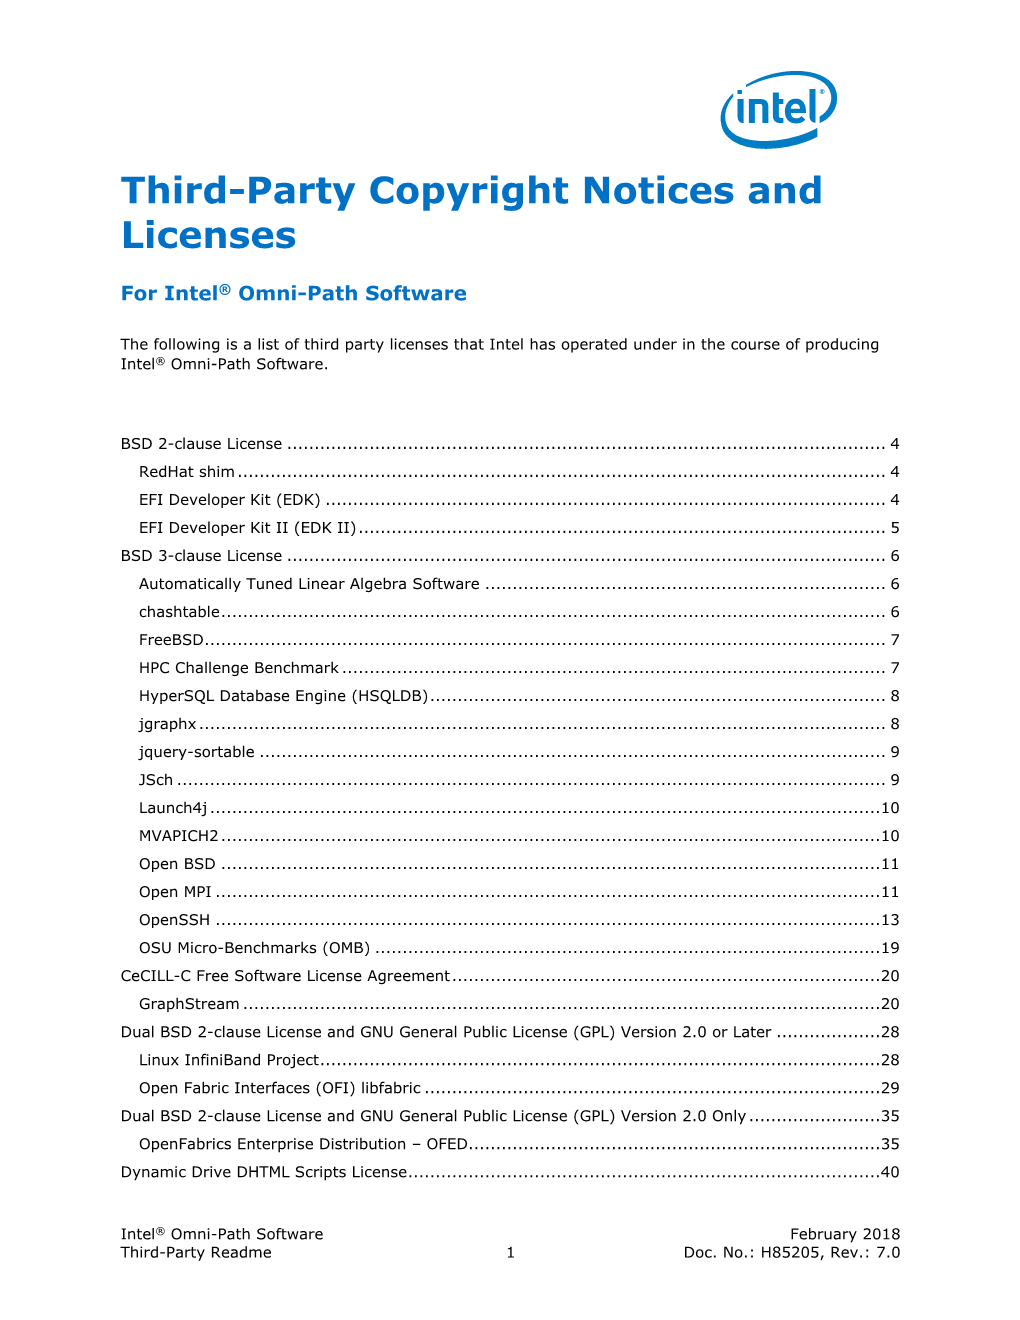 Third-Party Copyright Notices and Licenses